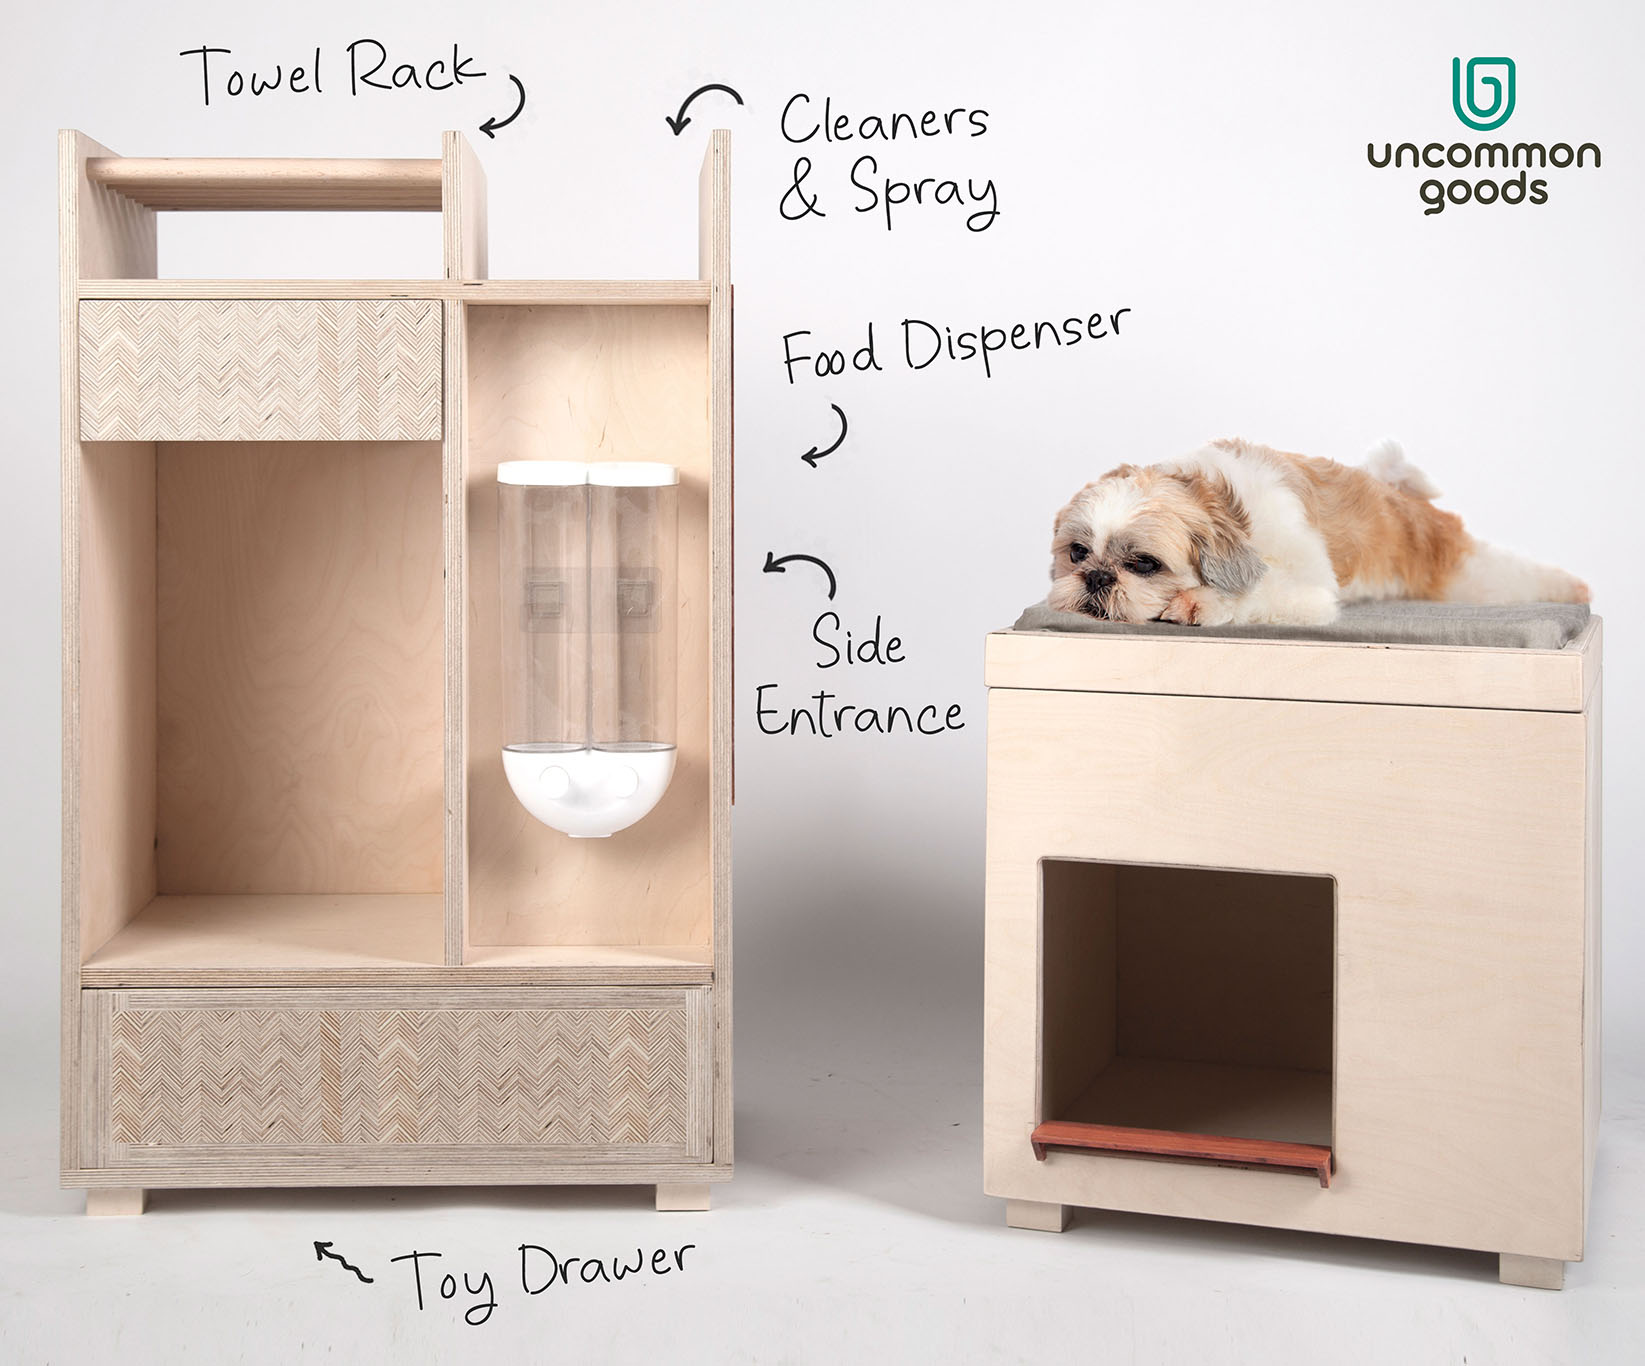 Uncommon Goods Singapore creates a clever and thoughtful compact dog house for a HDB room for a shihtzu dog